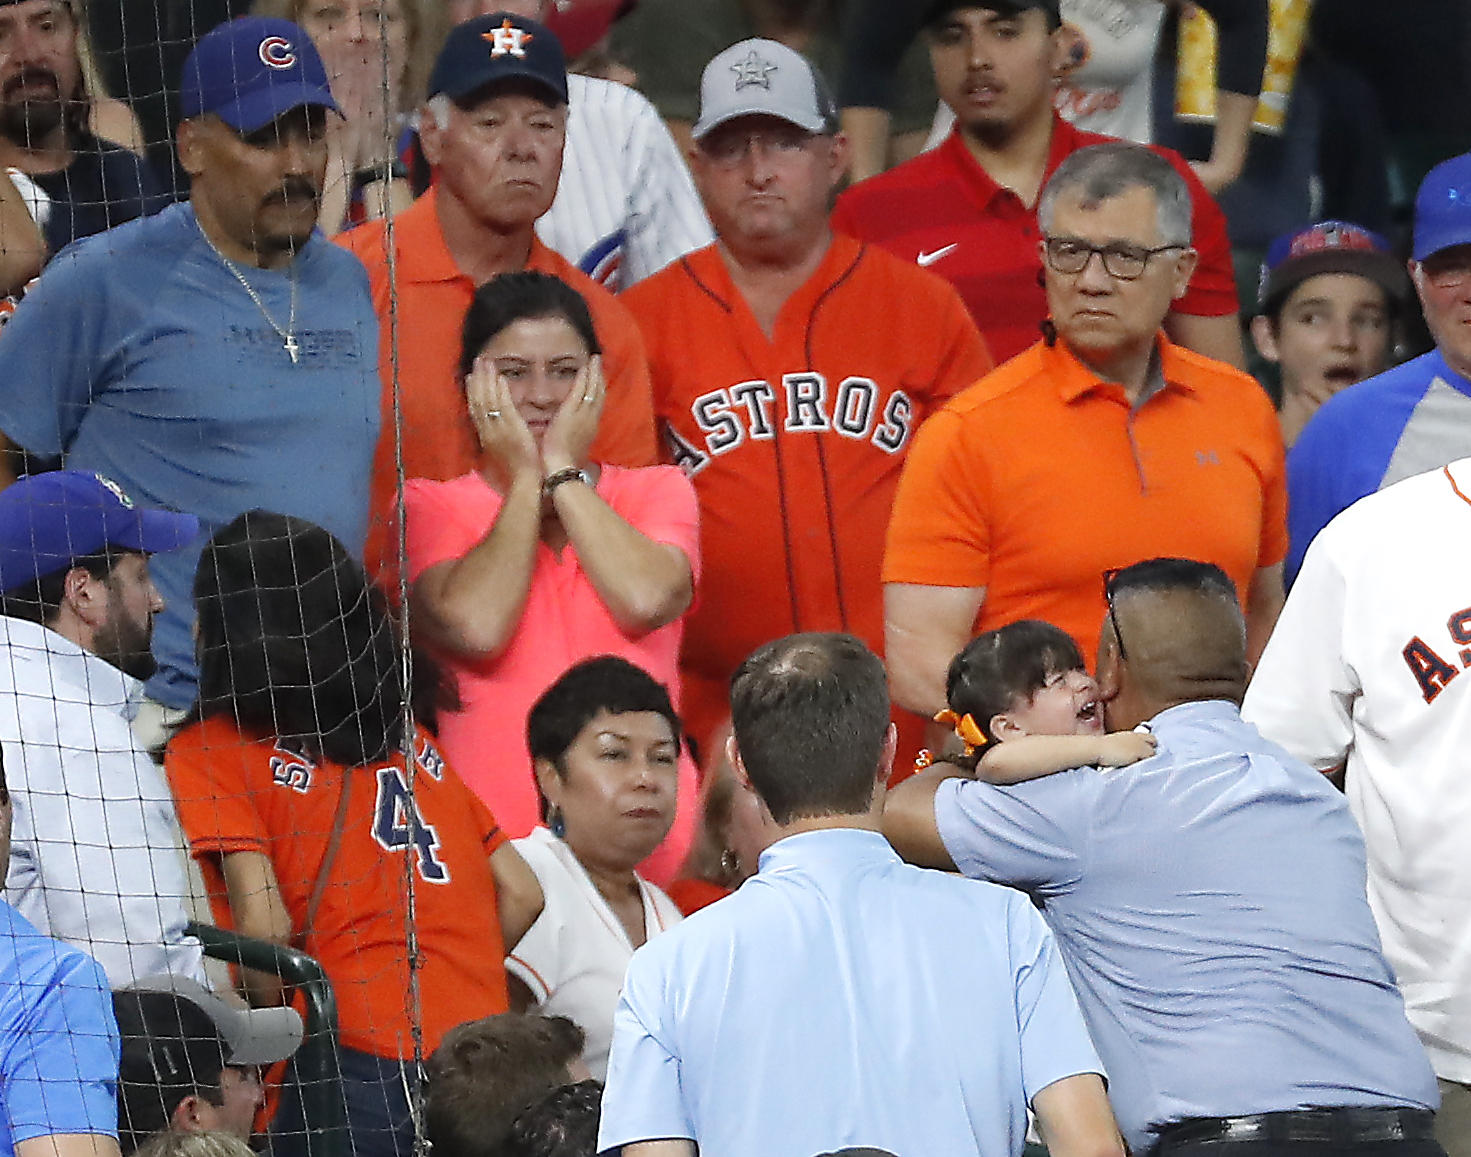 Young girl hit by foul ball at Astros-Cubs game at Minute Maid Park